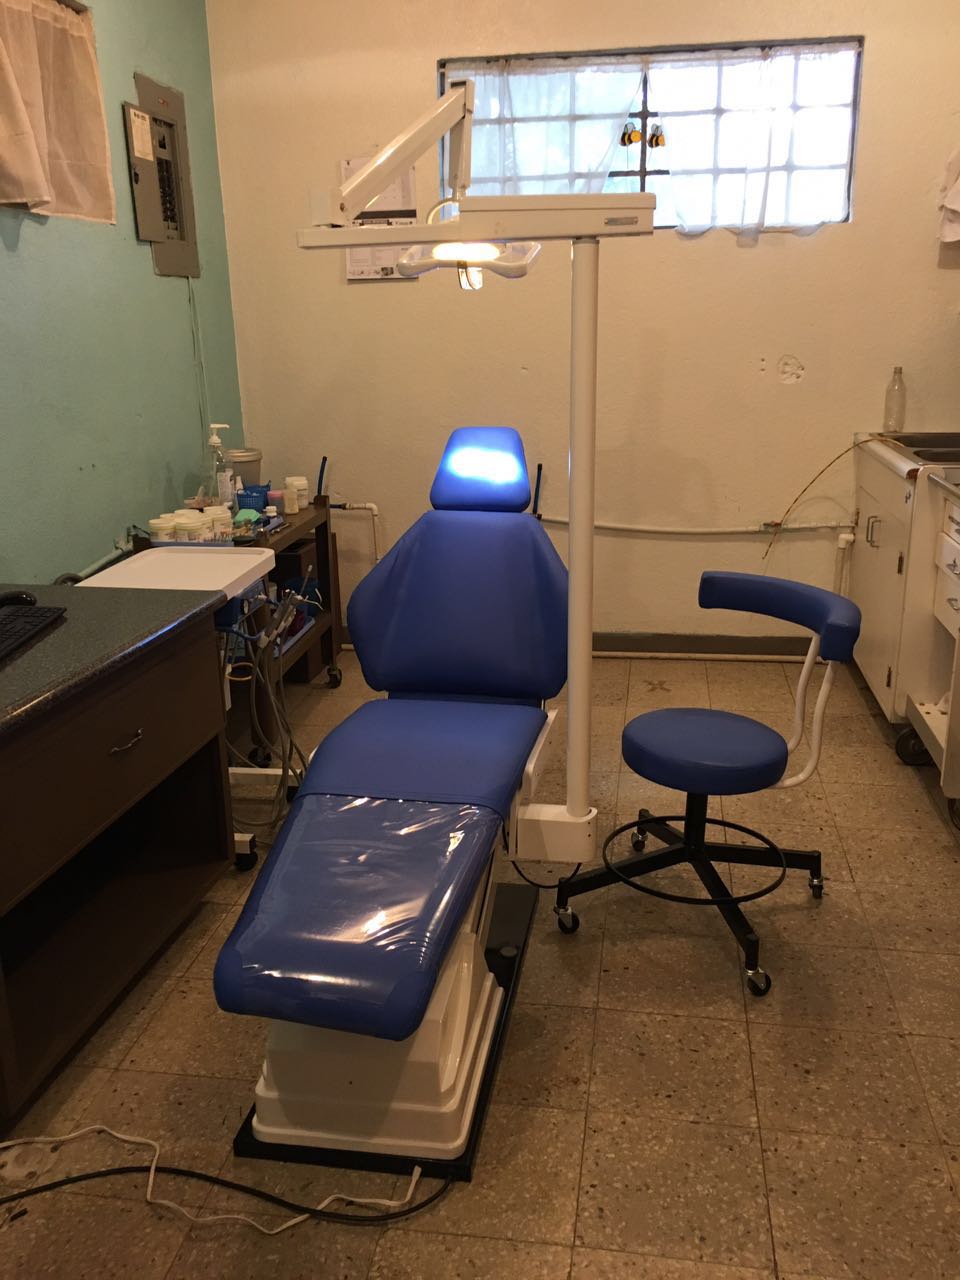 This is the dental chair, stool and light